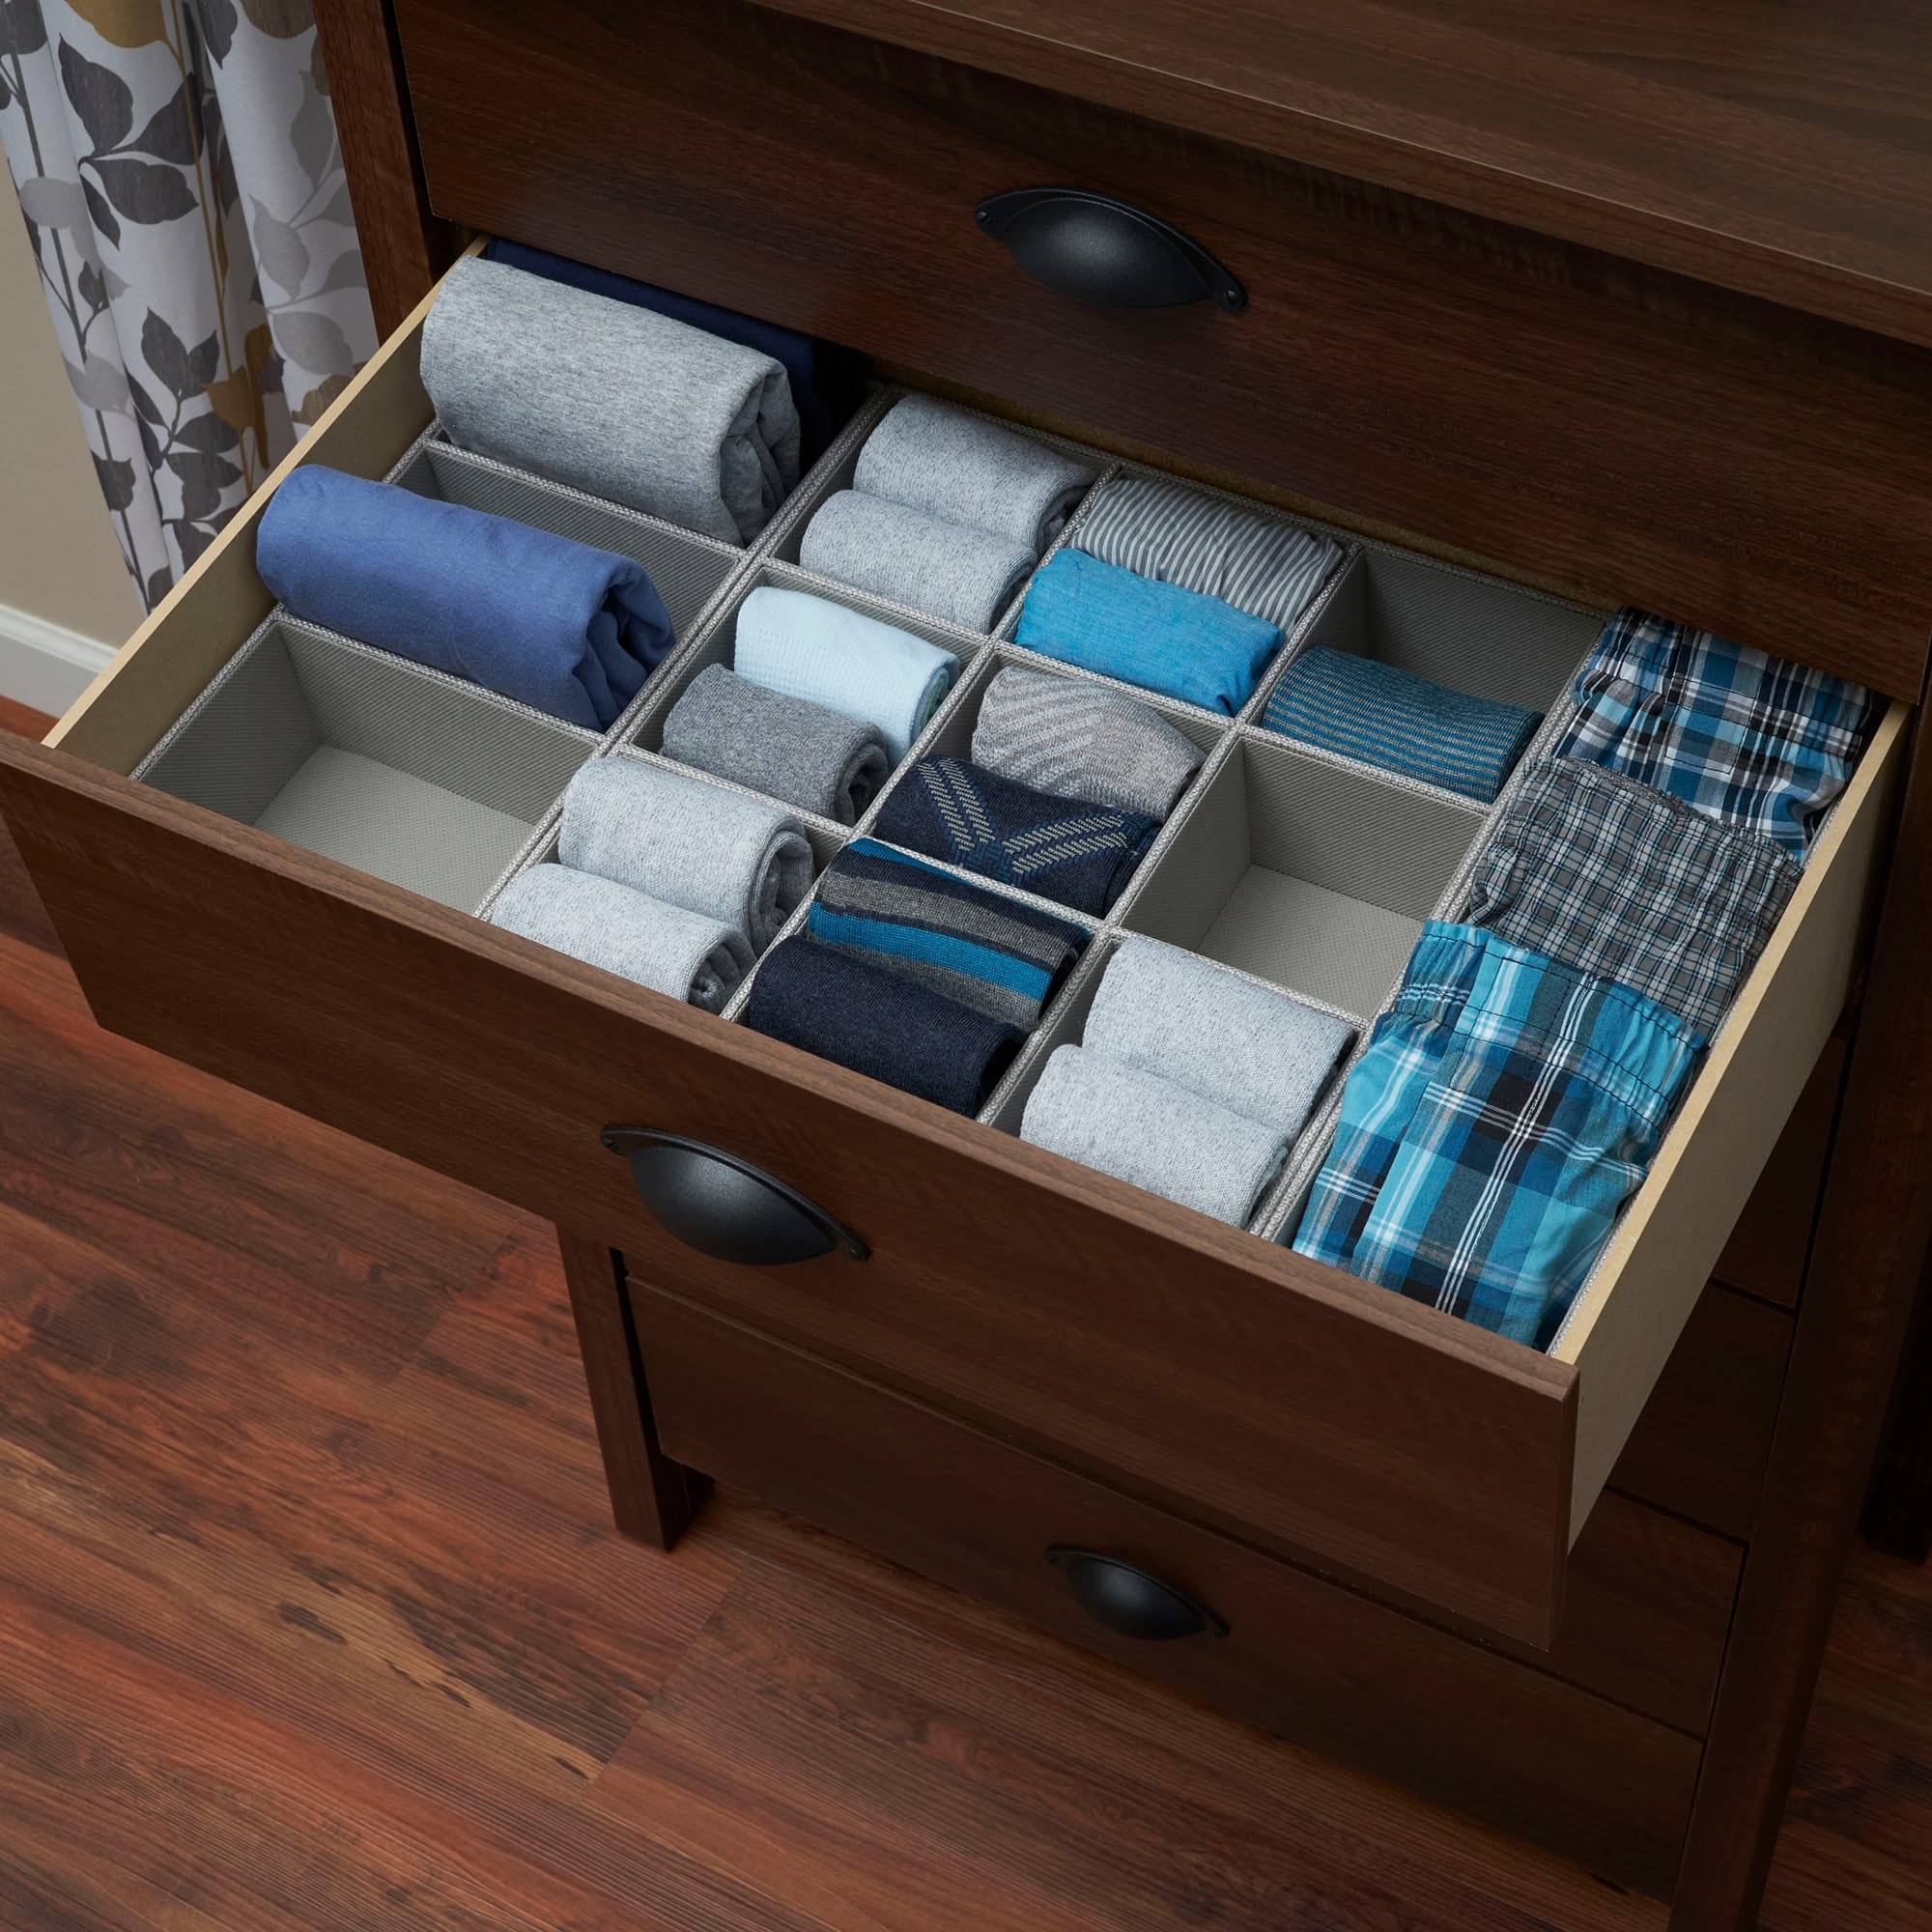 https://ak1.ostkcdn.com/images/products/is/images/direct/76e1277aadfddc7d194987c67b7439667508d408/9-Compartment-Drawer-Organizer-Tray.jpg